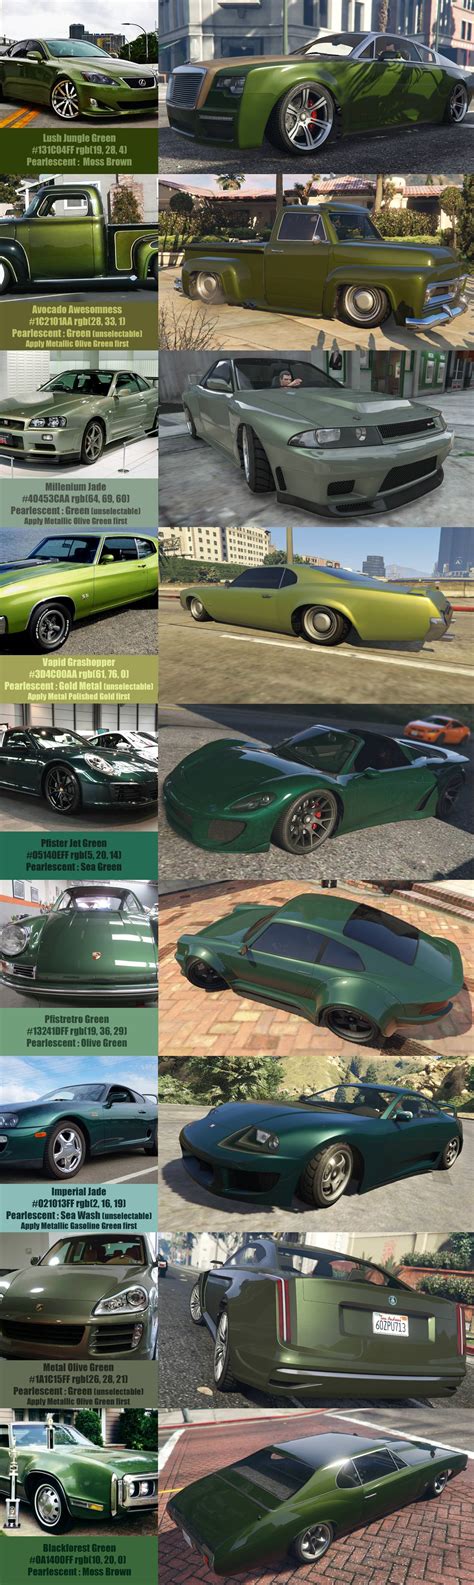 Gta forms. Posted June 29, 2016. I have made a new crew color, and the new Pfister 811 is such a beautiful car in my opinion, so here goes..... C64 Cool Peach. #642D1FAA. Pearl: Dark Steel. Secondary: Black Steel. Wheel Color: Black Steel. Mervz789 and C64fanatic. 2. 